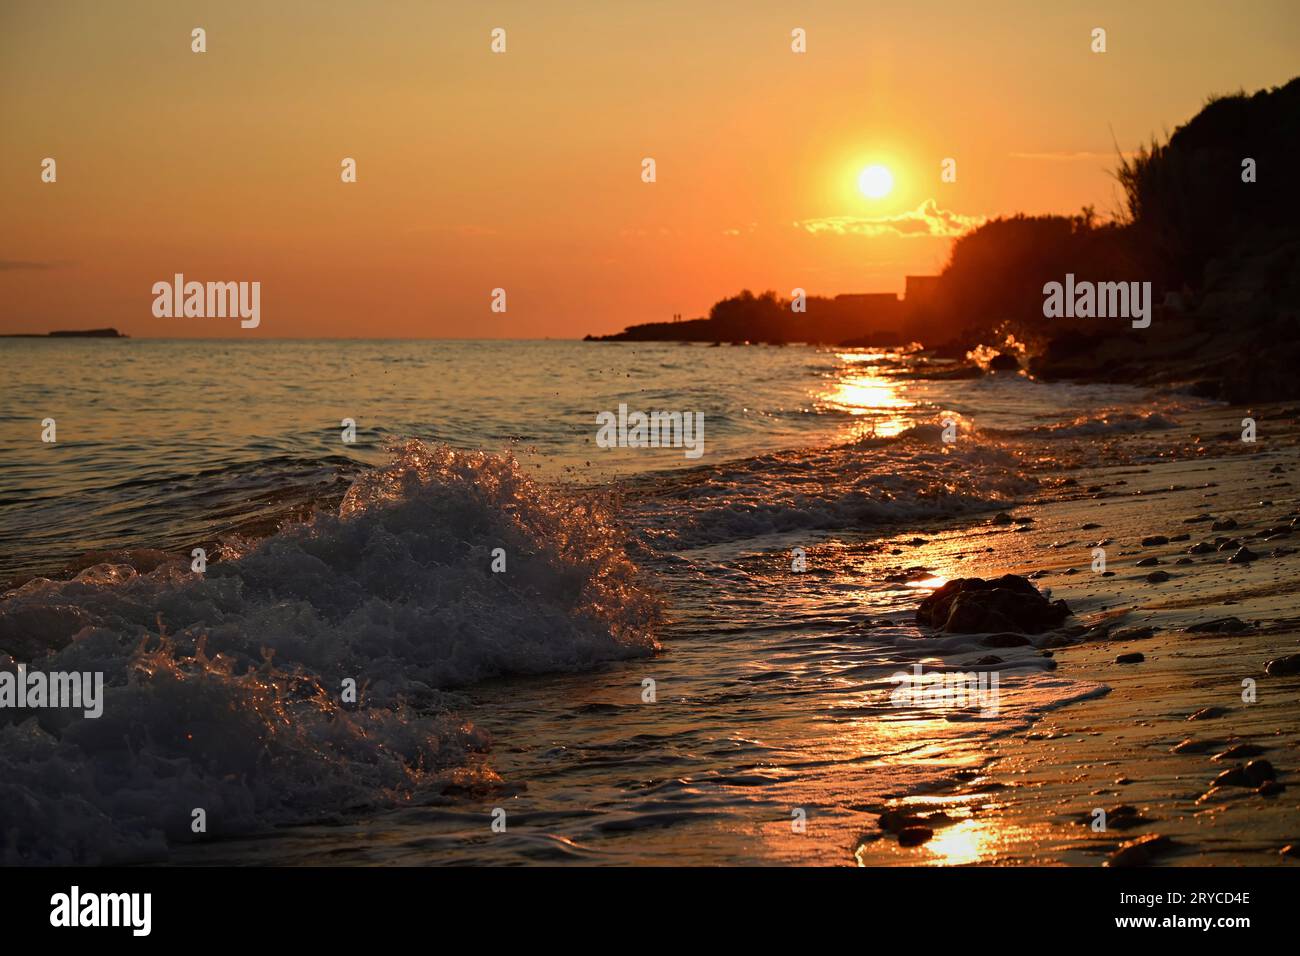 Beautiful sunset on the beach with the sea. Greece - island of Corfu (Kerkyra). Concept for travel, holidays and summer vacations. Stock Photo